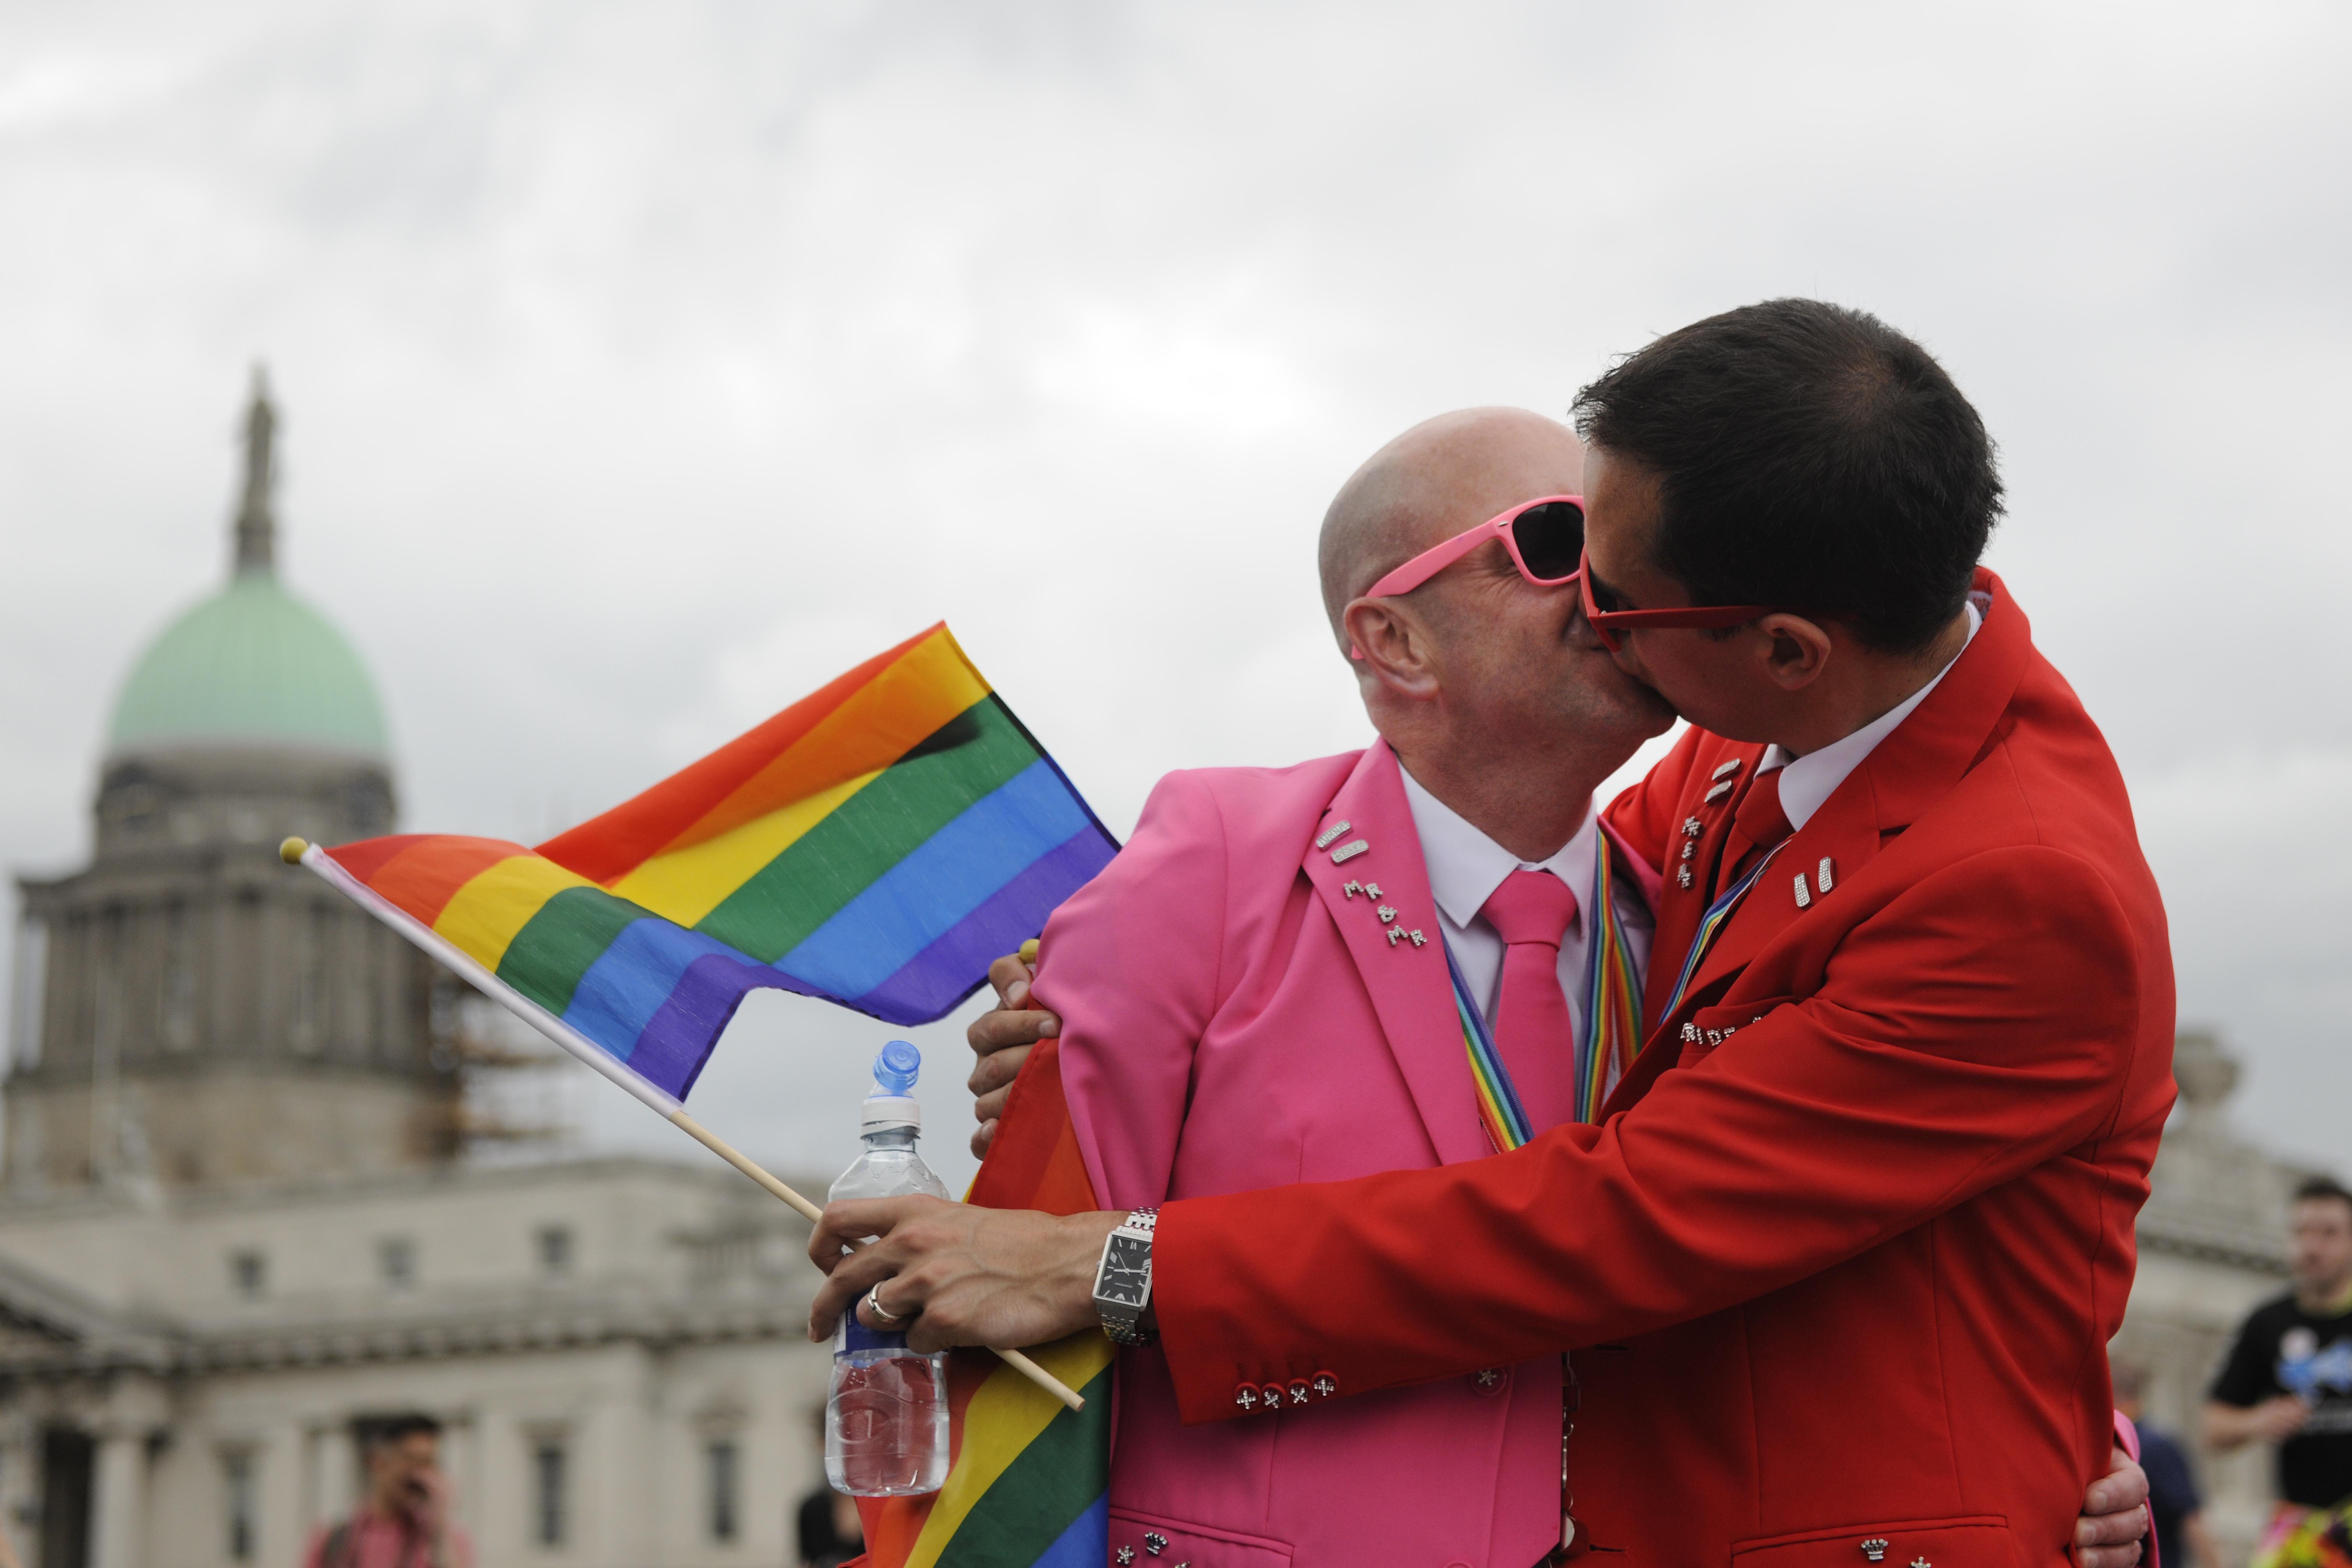 People take part in the annual Gay Pride Parade on June 27, 2015 in Dublin.